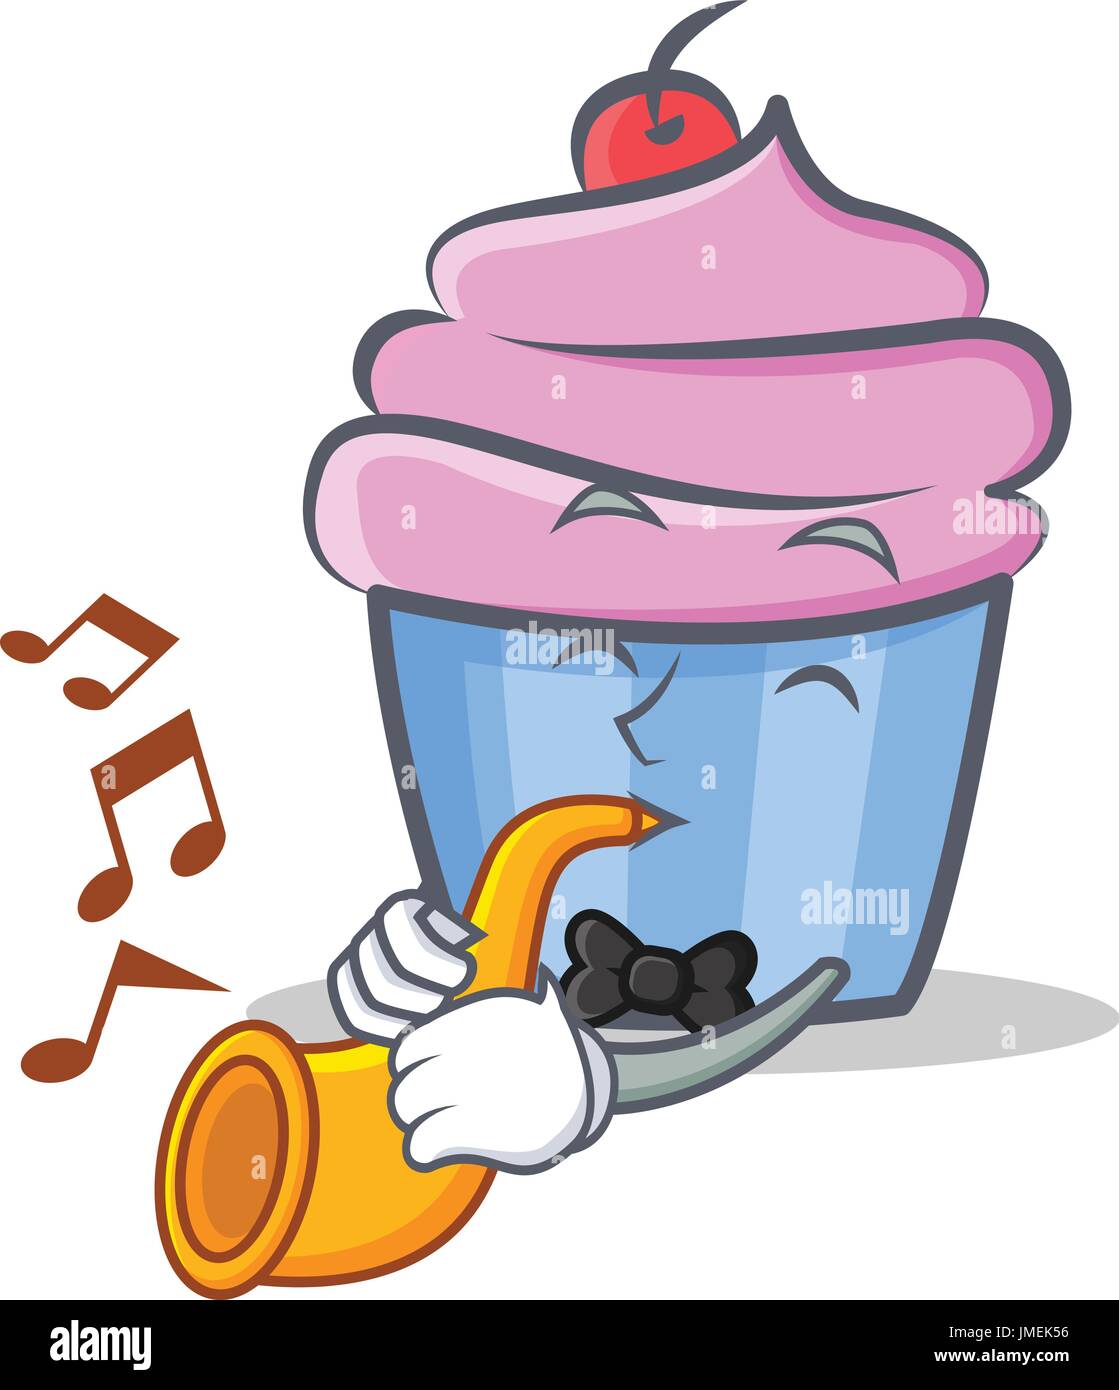 cupcake character cartoon style with trumpet vector illustration Stock Vector